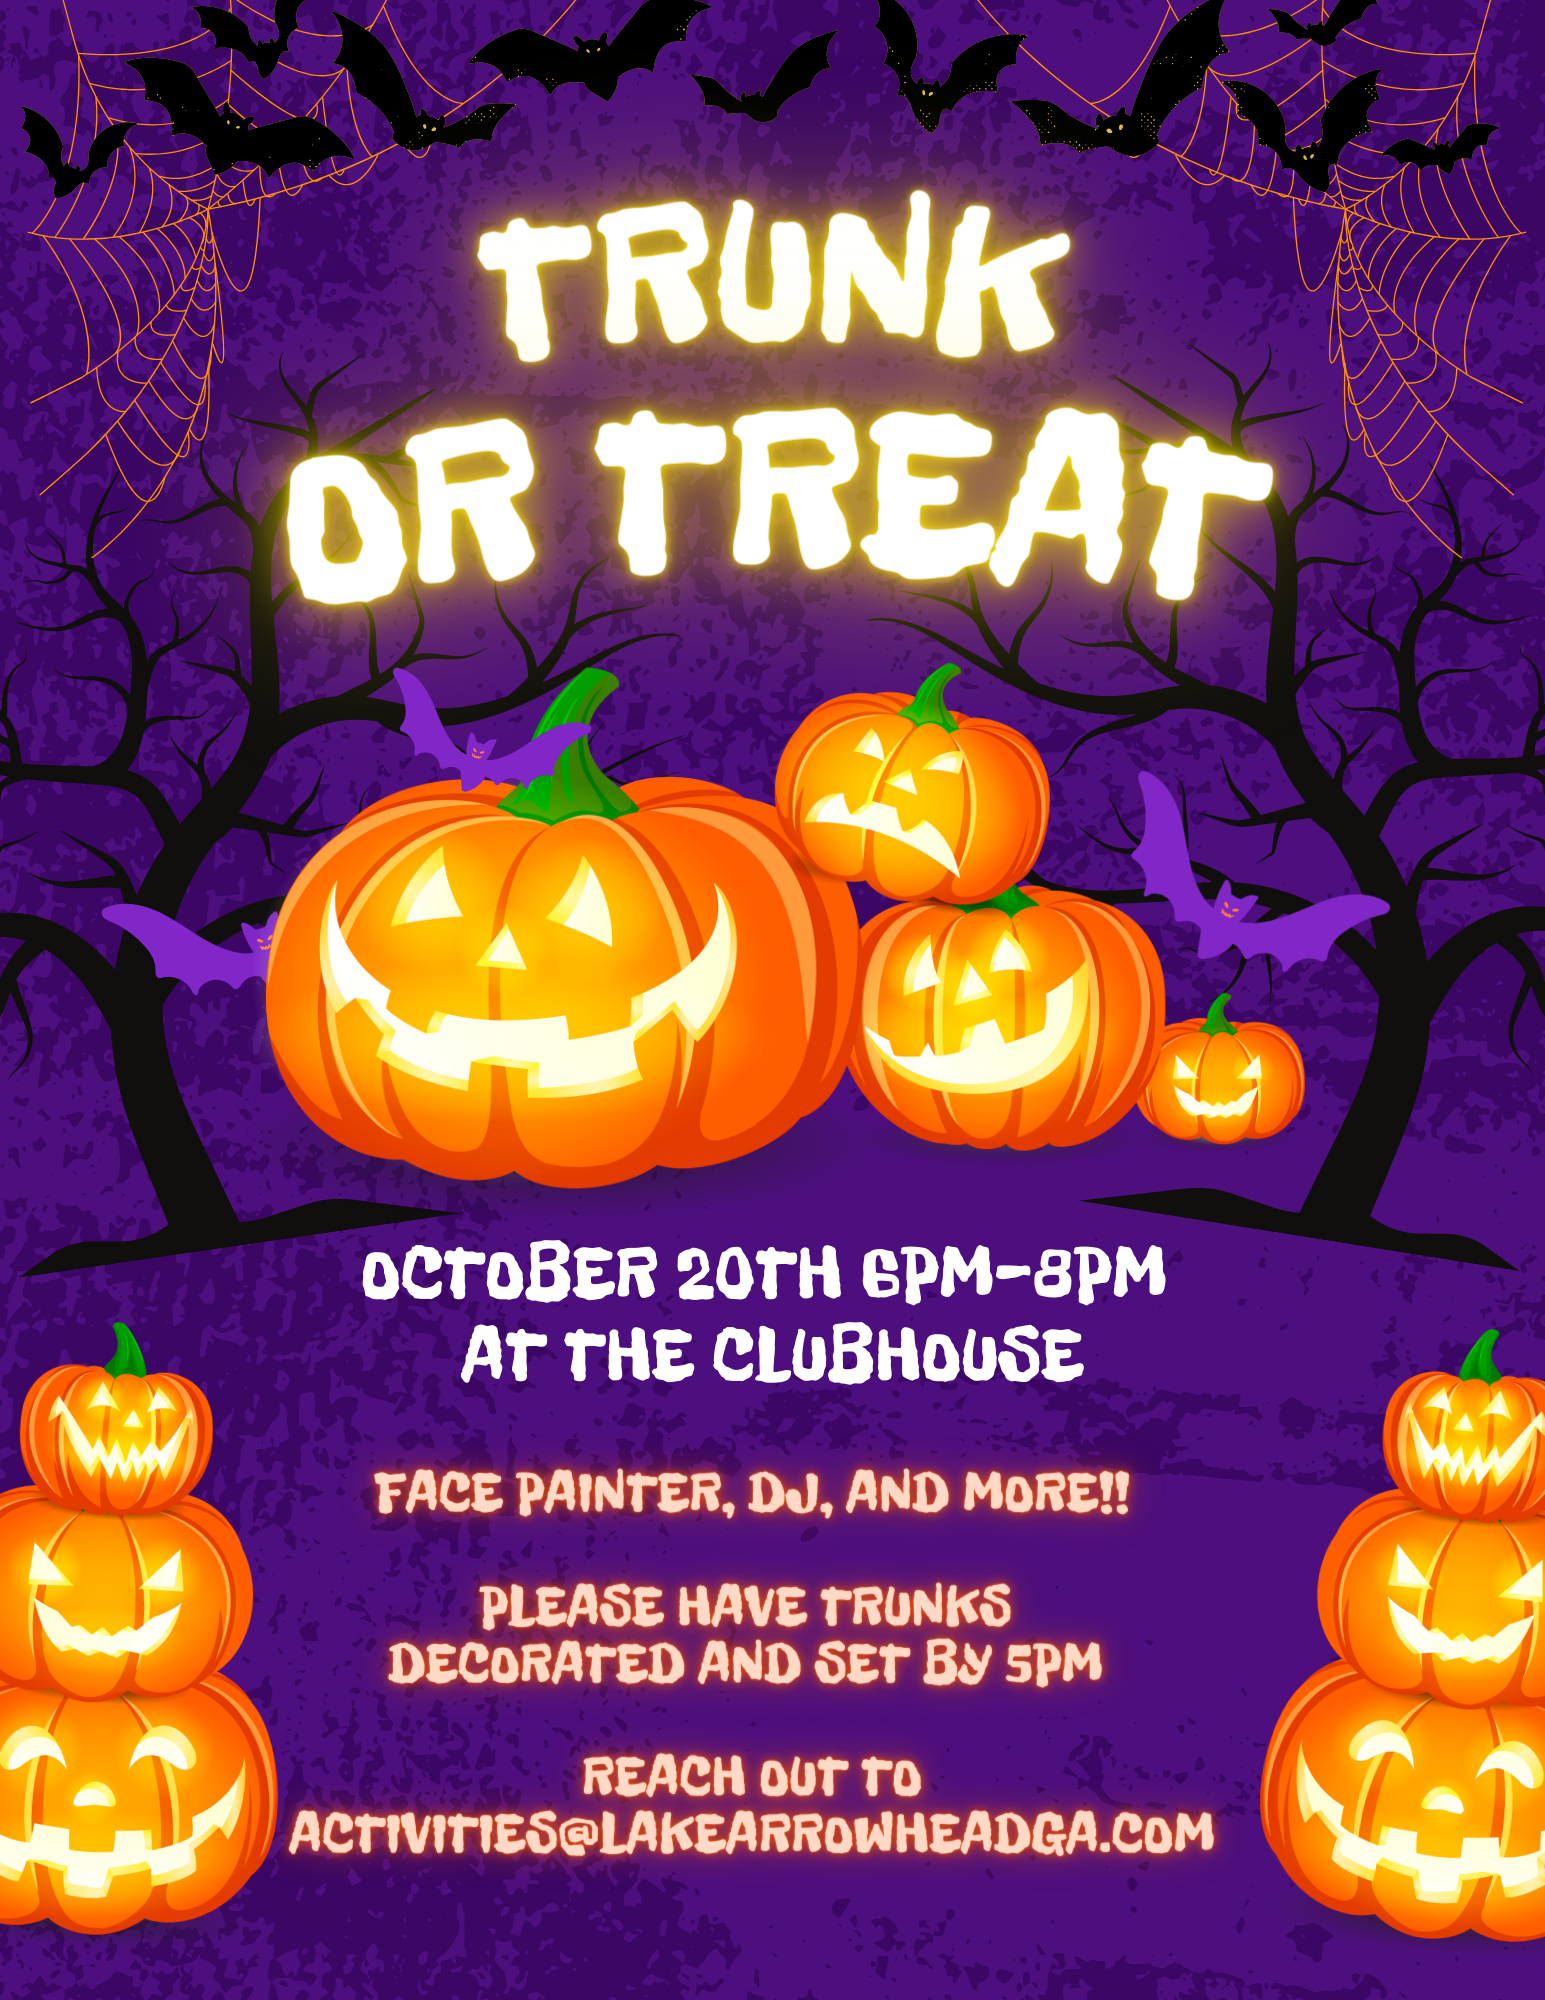 Trunk or Treat October 20th